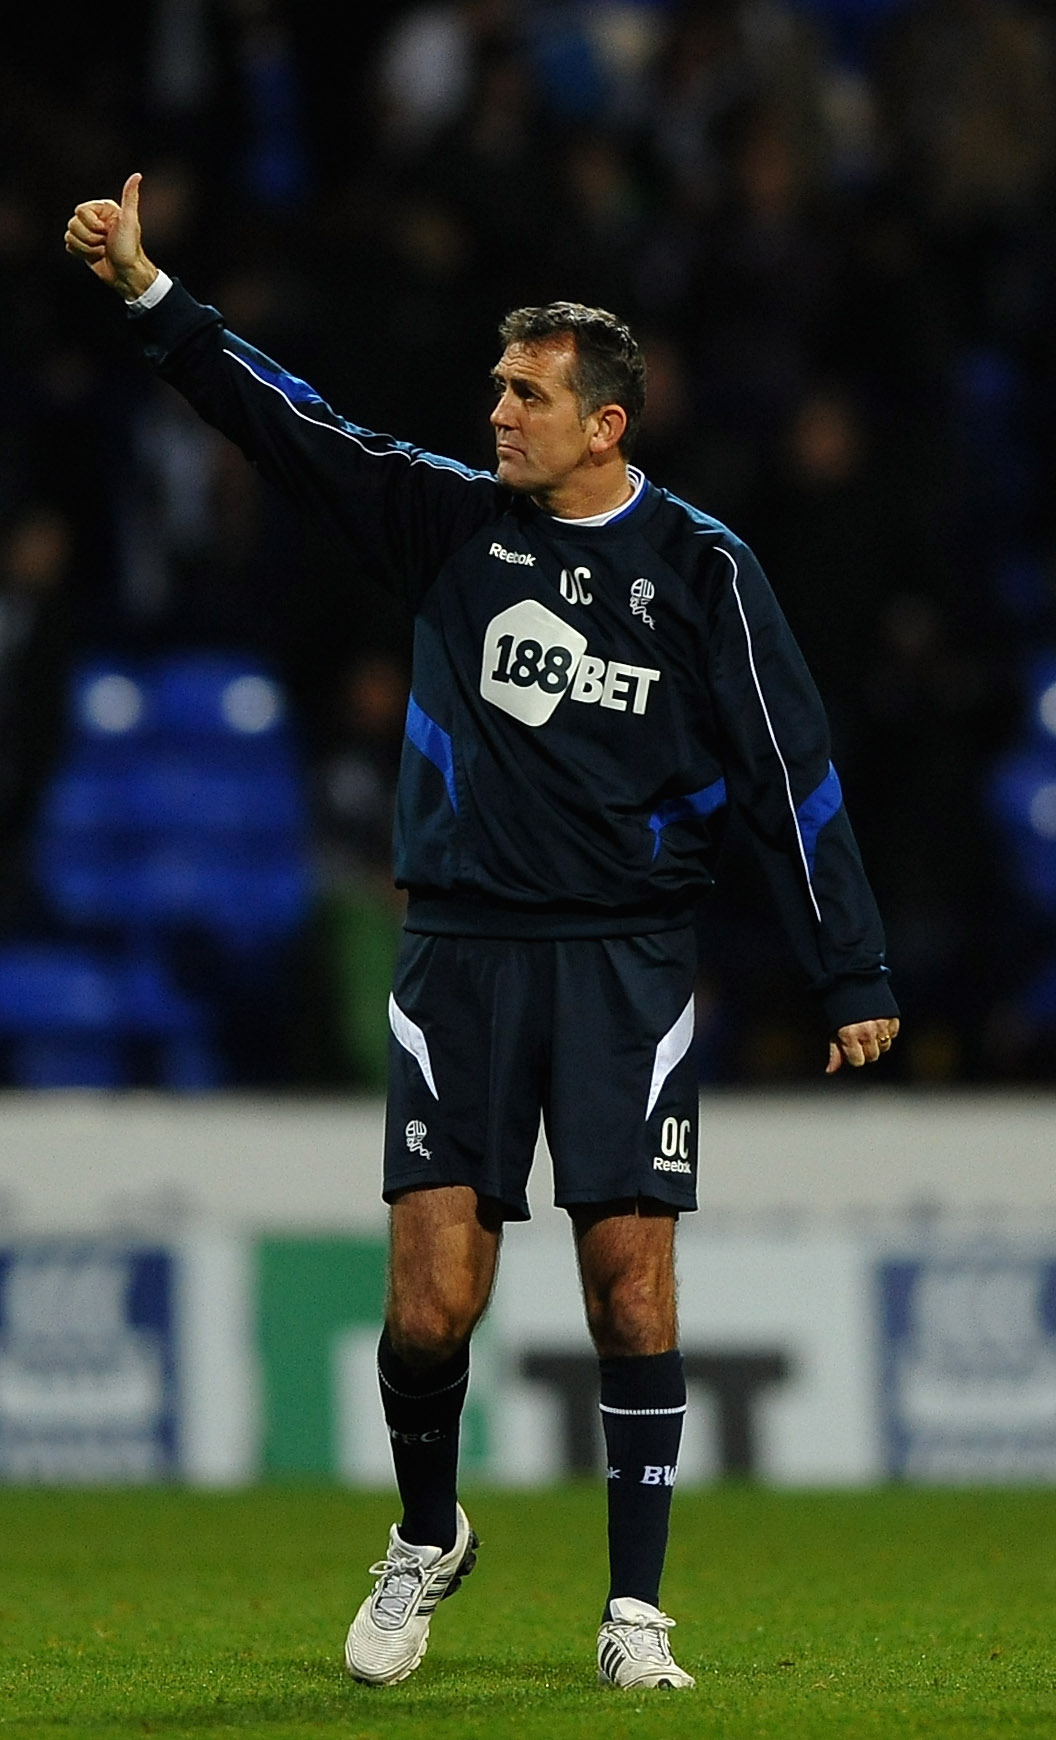 BOLTON, ENGLAND - NOVEMBER 20: Owen Coyle of Bolton Wanderers applauds the fans during the Barclays Premier League match between Bolton Wanderers and Newcastle United at the Reebok Stadium on November 20, 2010 in Bolton, England.  (Photo by Laurence Griff